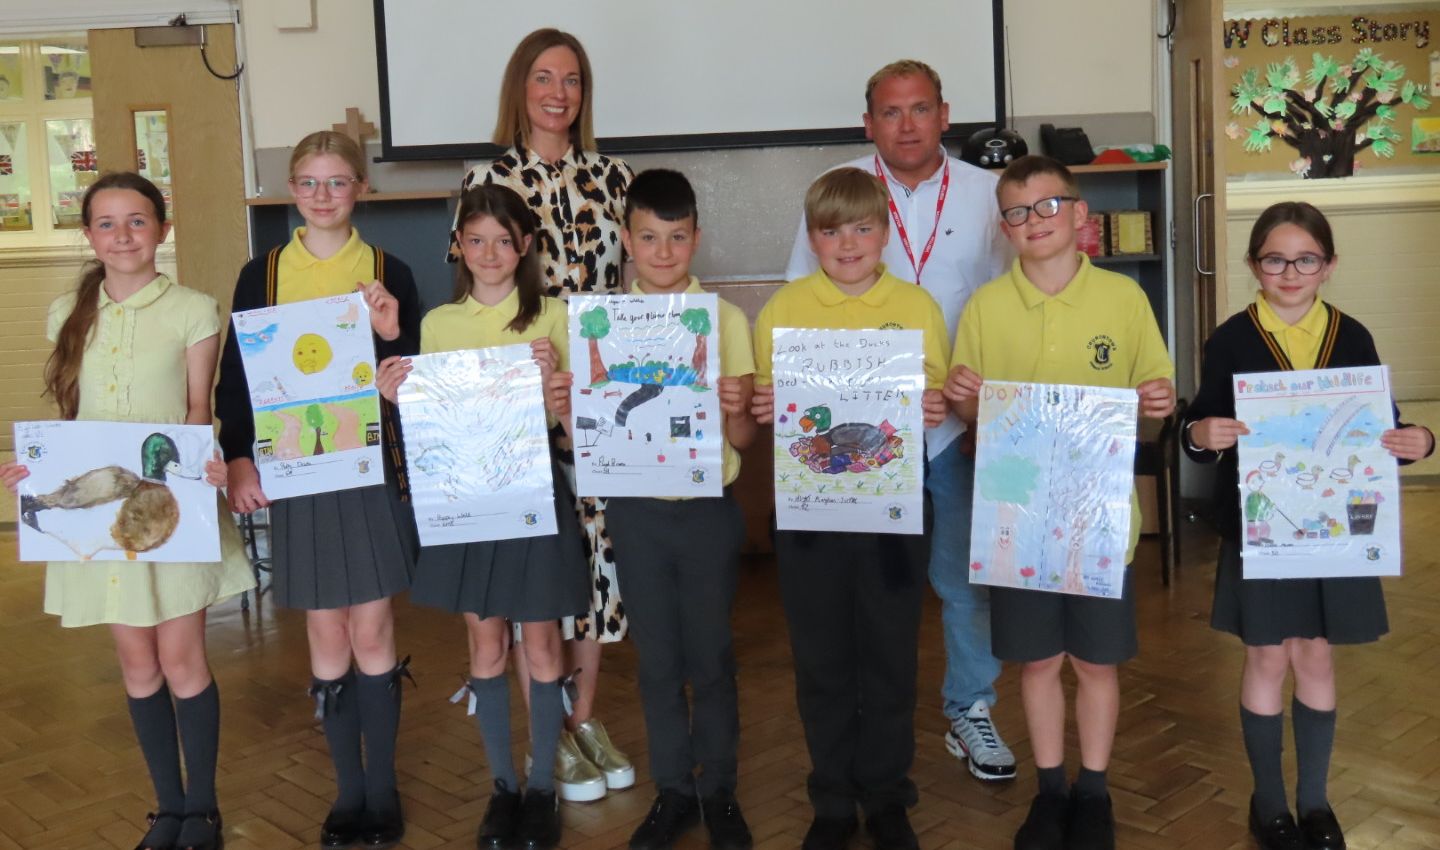 Churchtown Primary School pupils took part in an art competition as part of the Make A Change For Botanic Family Fun Day. There were four themes of the competition which included: Year 5 &; 6, The impact of litter on the park. Photo by Andrew Brown Media